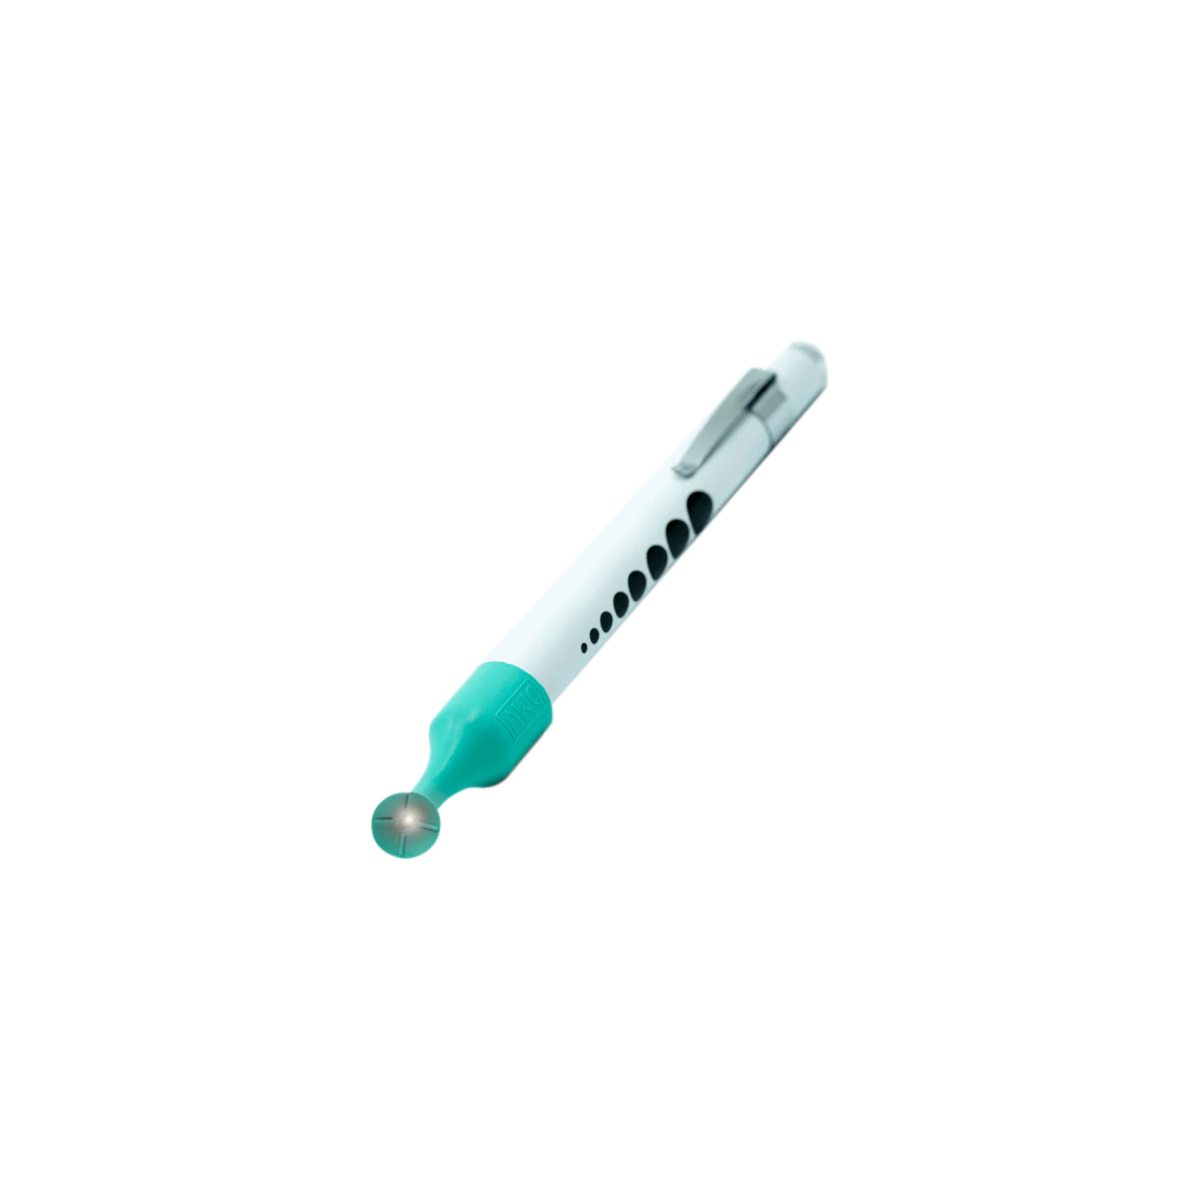 DMV Luma-Serter Contact Lens Insertion and Removal Tool (5-Pack Green)